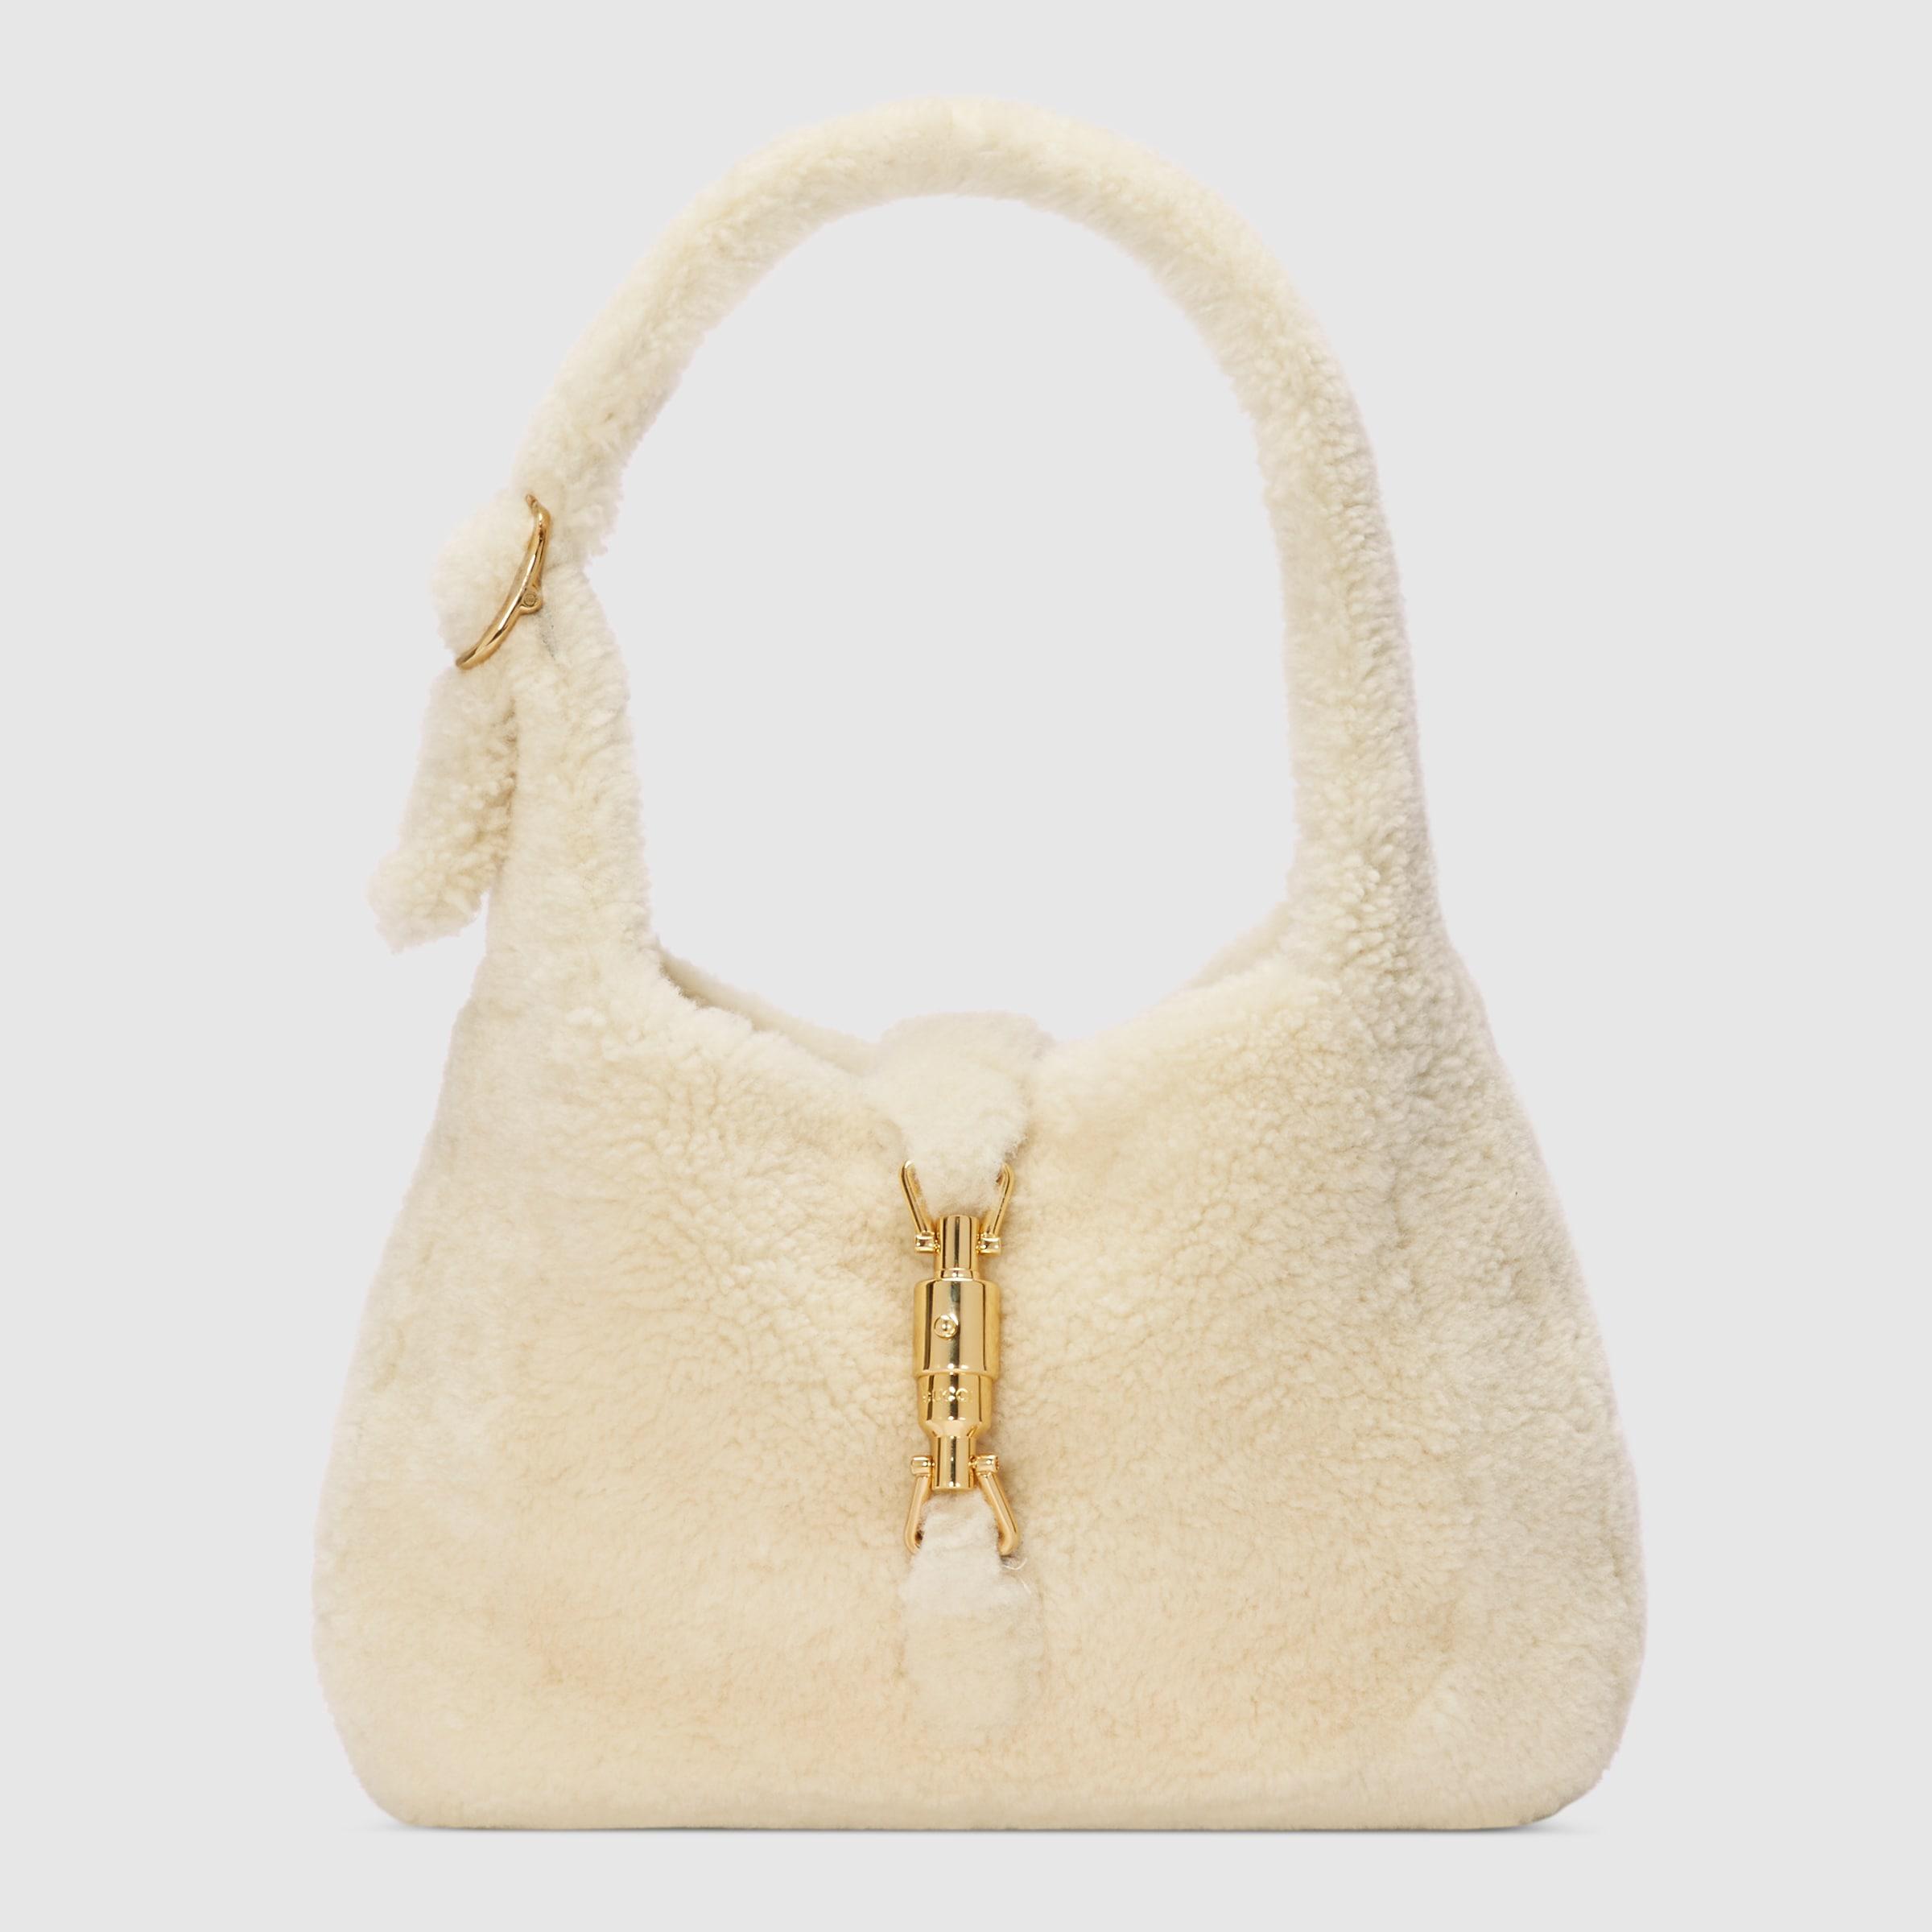 Gucci Jackie 1961 Small Leather Shoulder Bag in White - Gucci